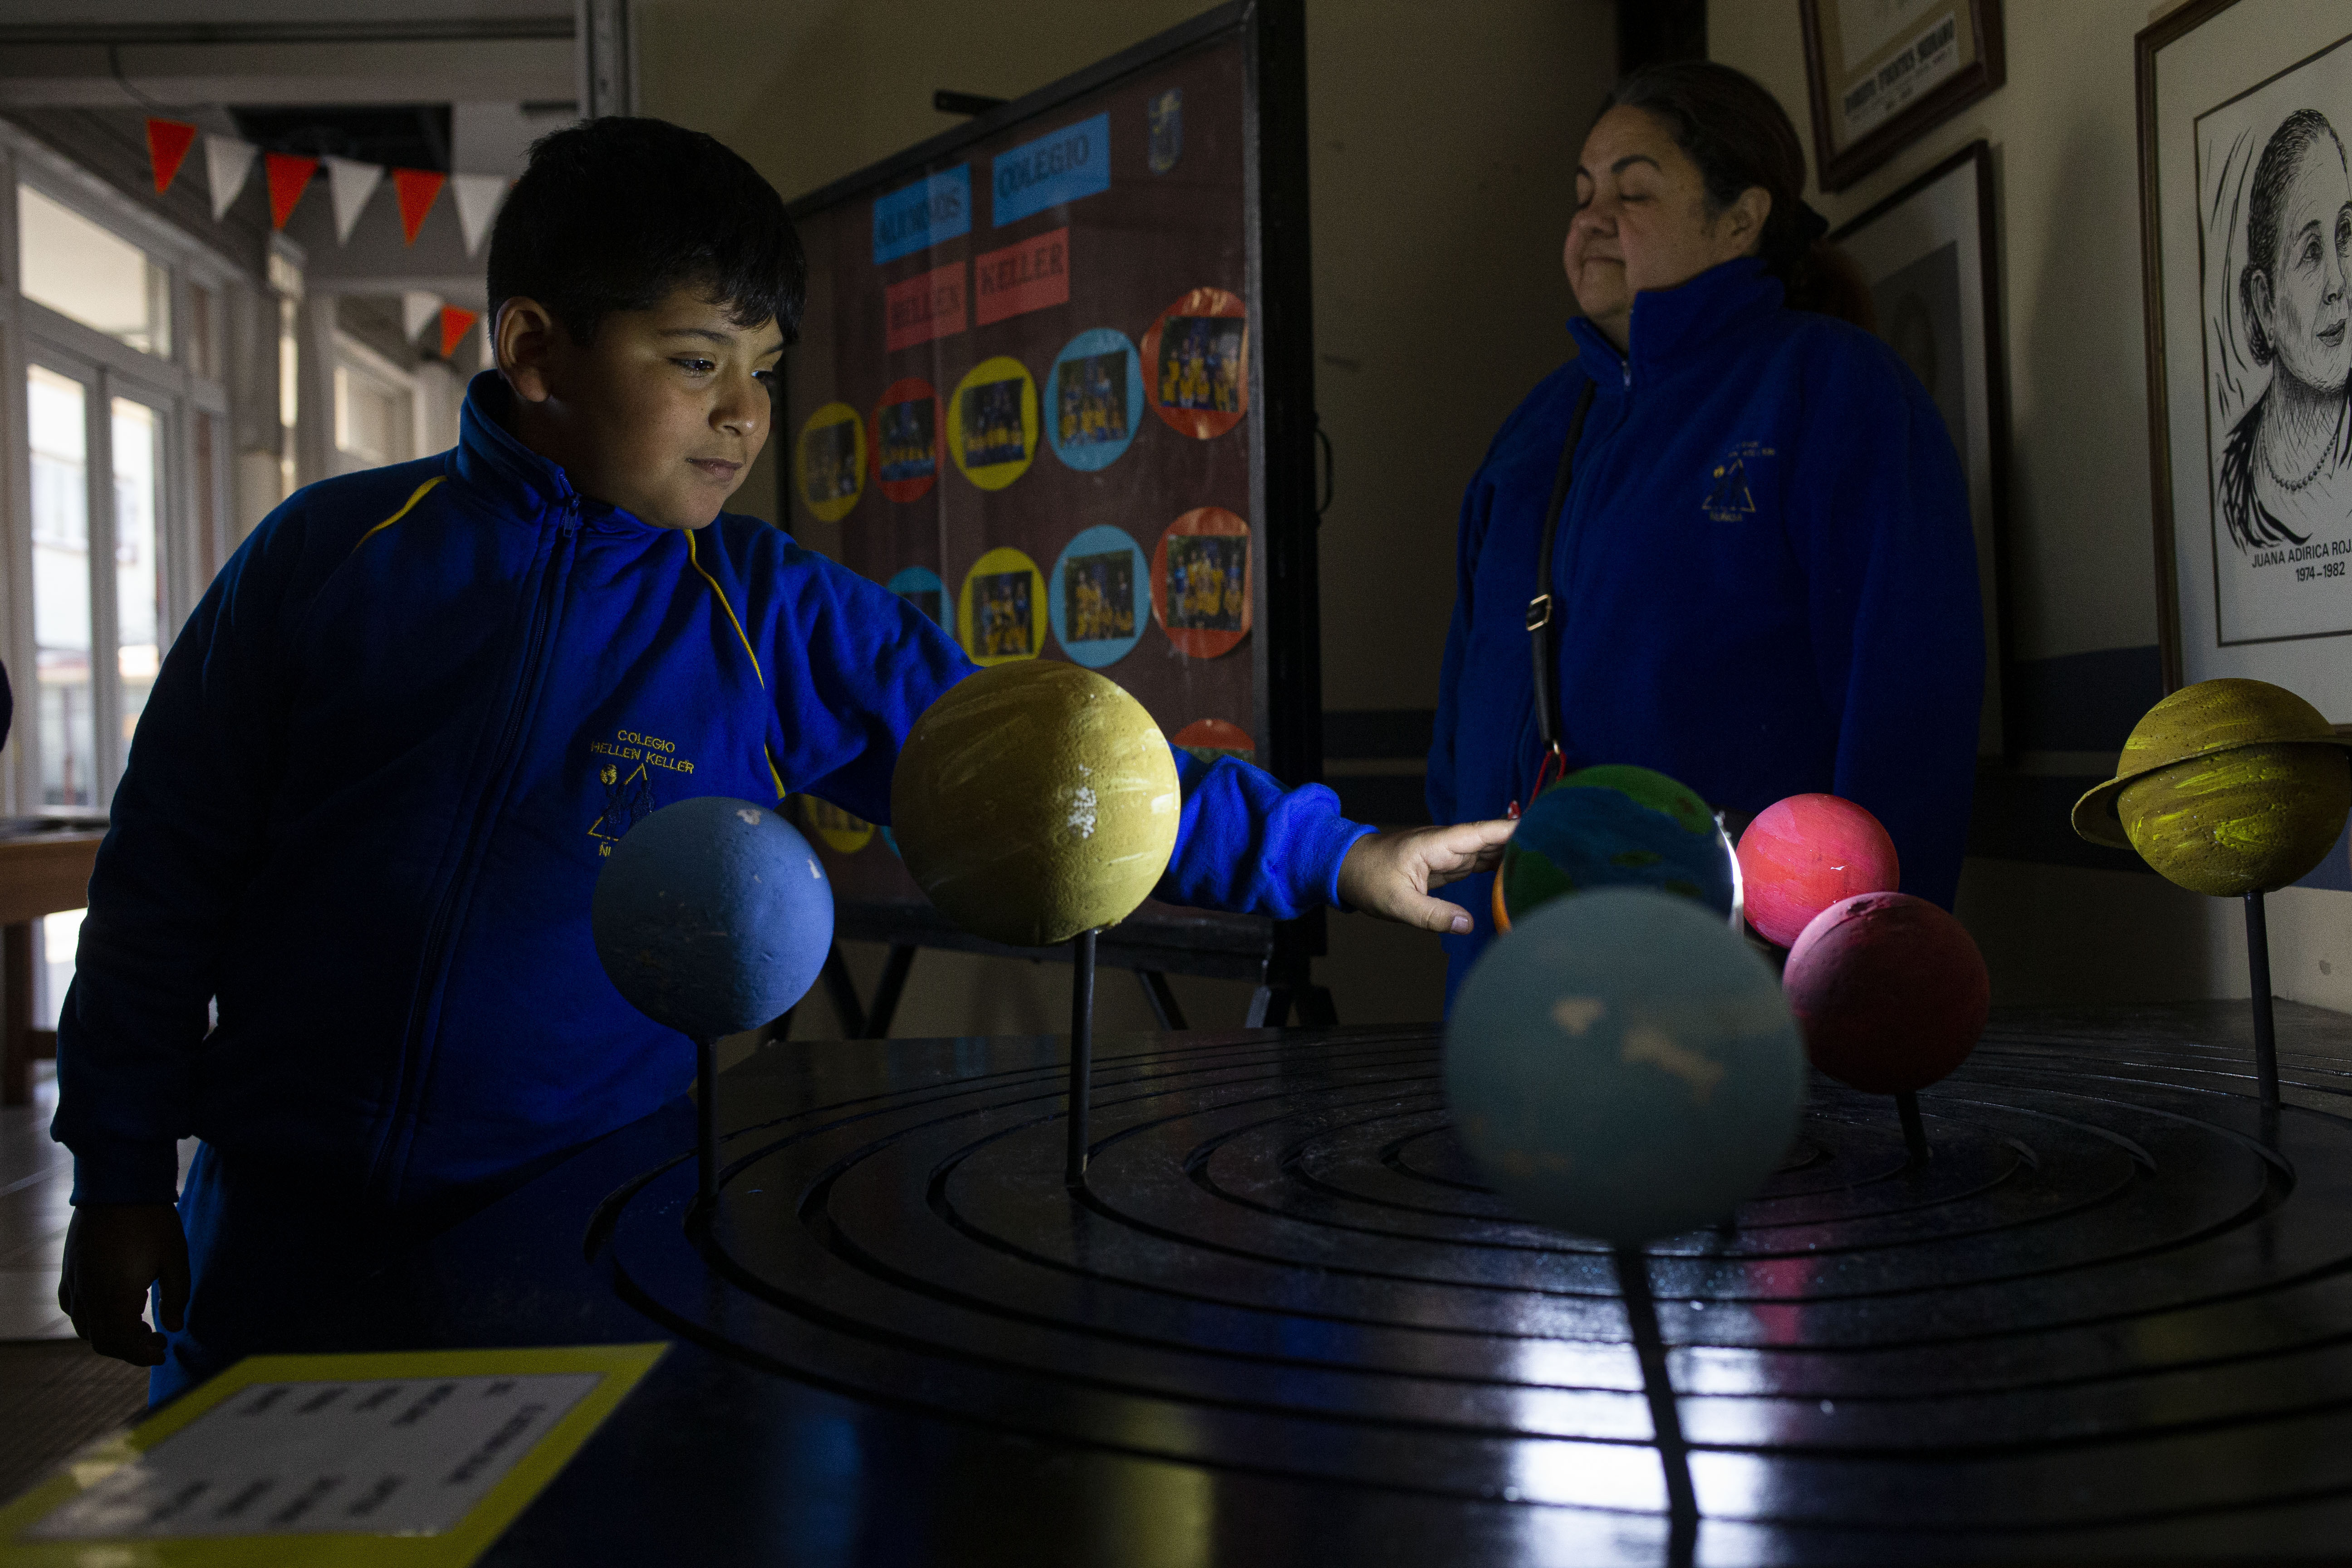 CORRECTS NAME OF UNIVERSITY - A blind child interacts with a representation of the solar system during sensorial experience with tools created by NASA and Edinboro University of Pennsylvania to experience an eclipse, at the Helen Keller school in Santiago, Chile, Tuesday, June 25, 2019. The event comes exactly one week ahead of a total solar eclipse which is set to be fully visible in various South American countries, including Chile. (AP Photo/Esteban Felix)